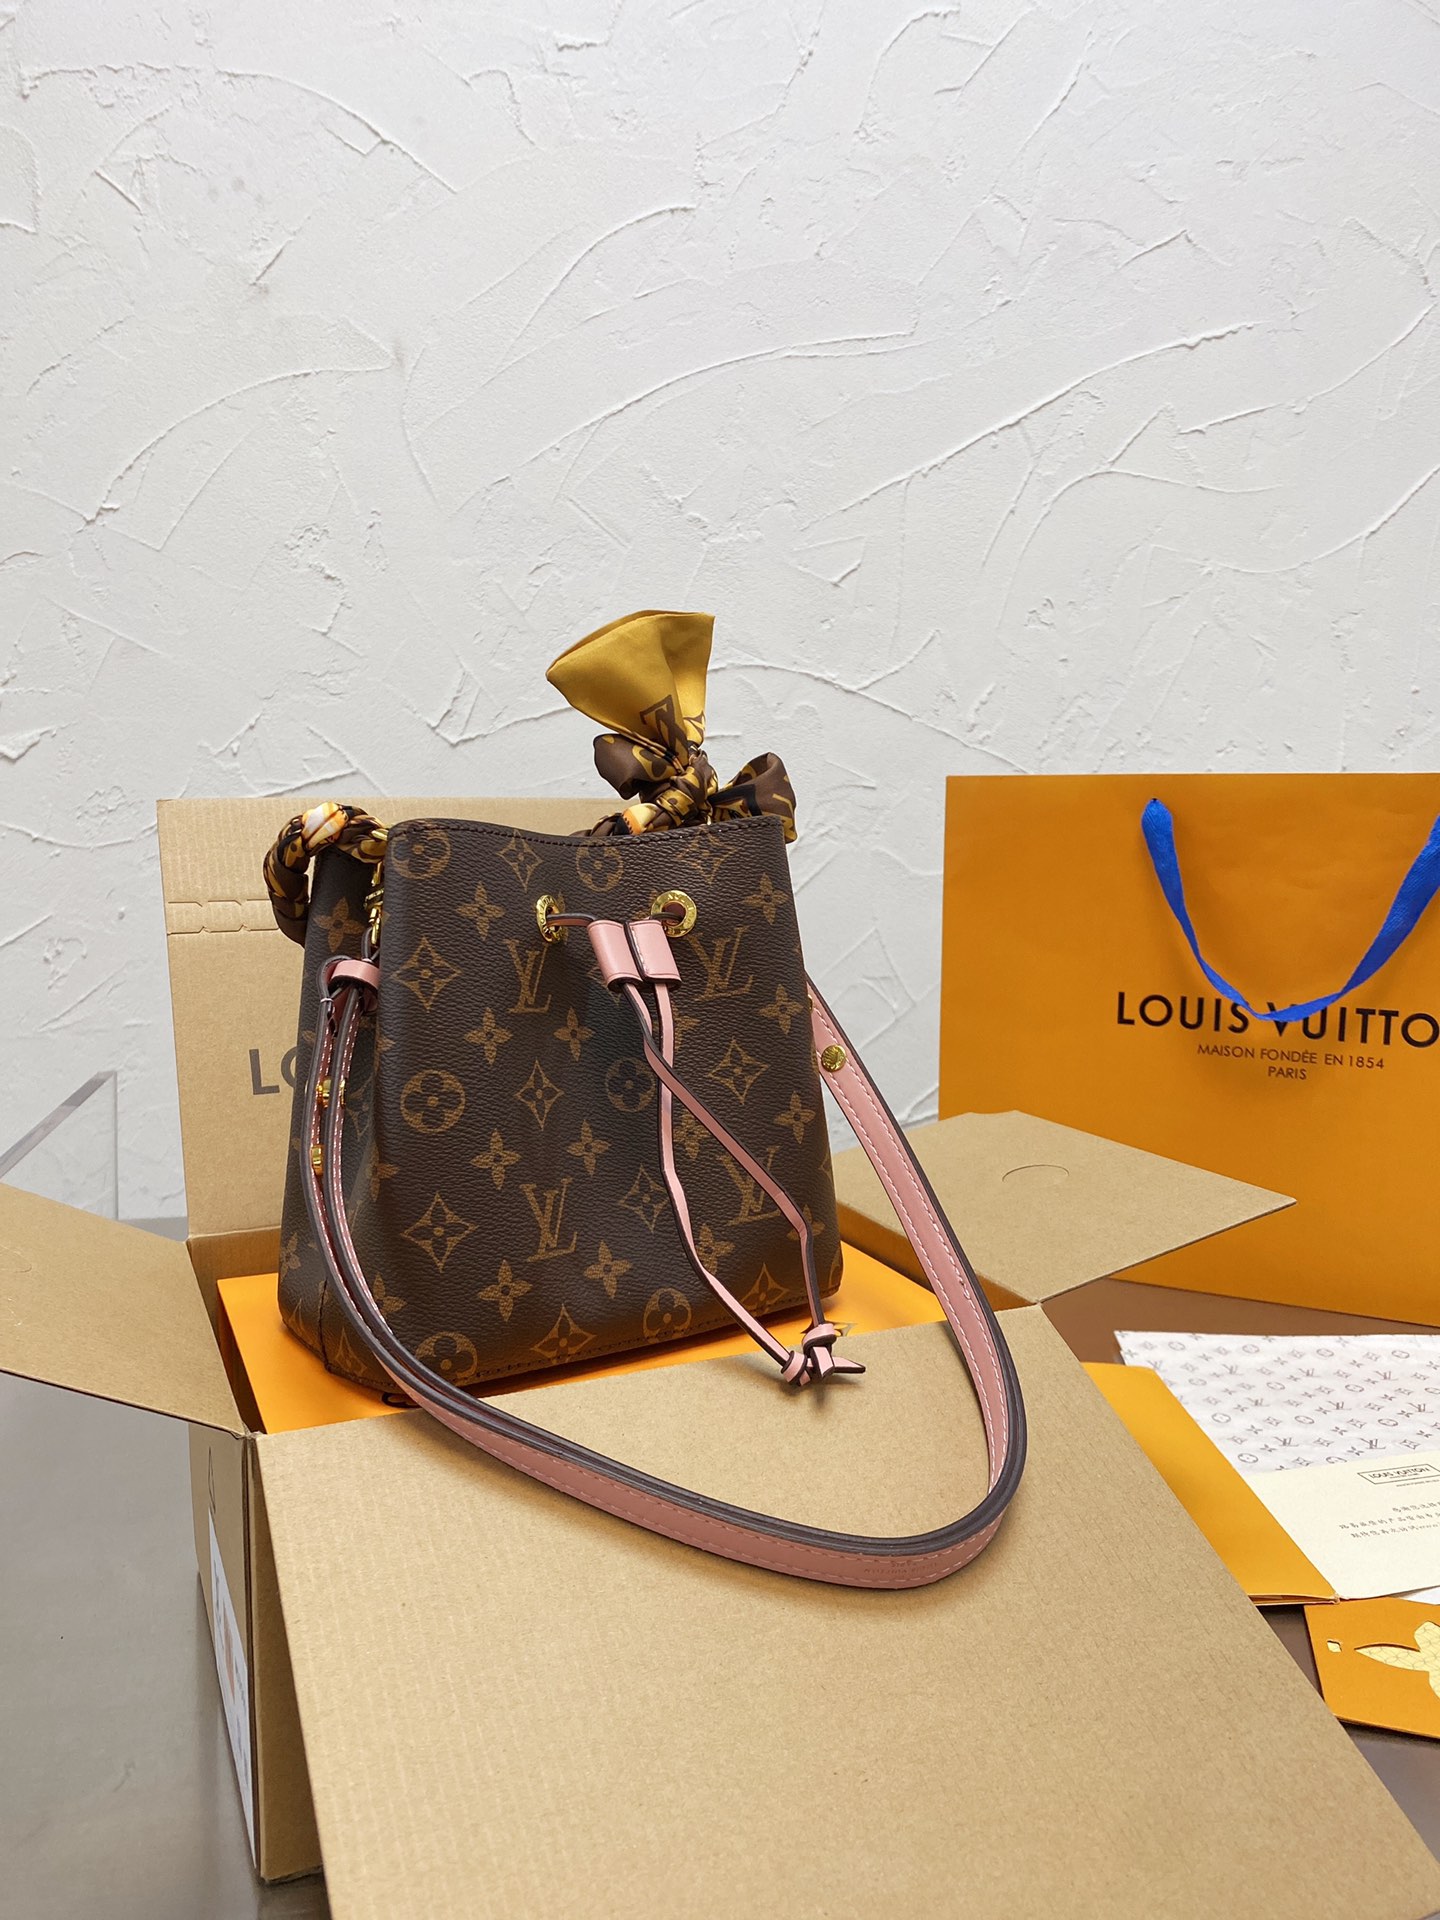 Take real photos before delivery.Do you like LV bags？#yupoo #lvbags #y